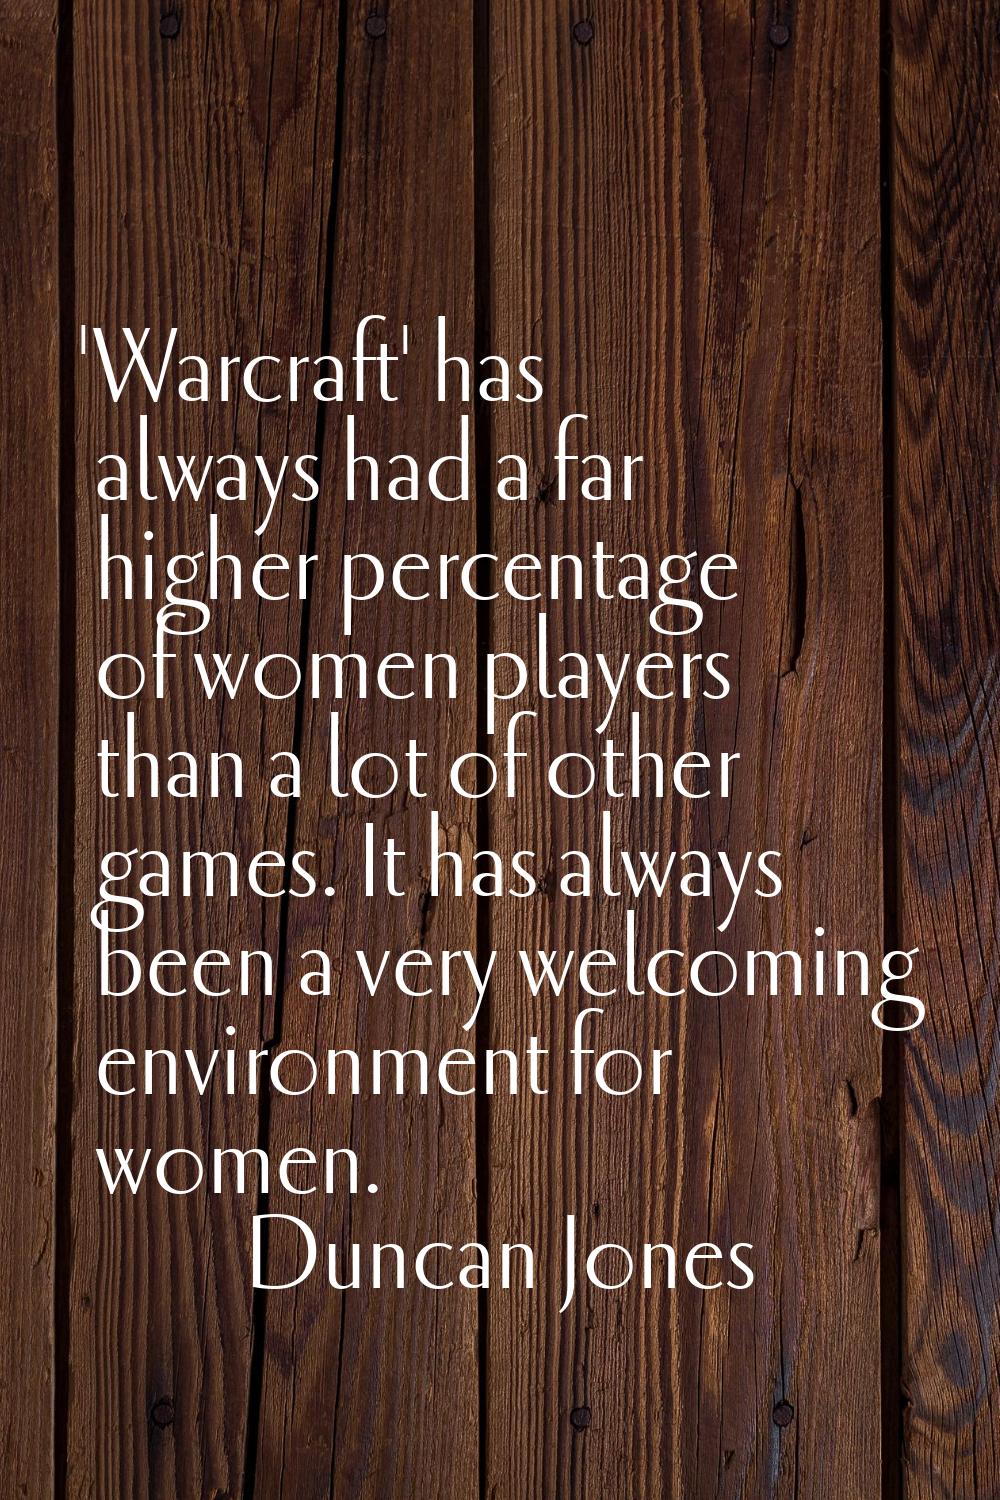 'Warcraft' has always had a far higher percentage of women players than a lot of other games. It ha